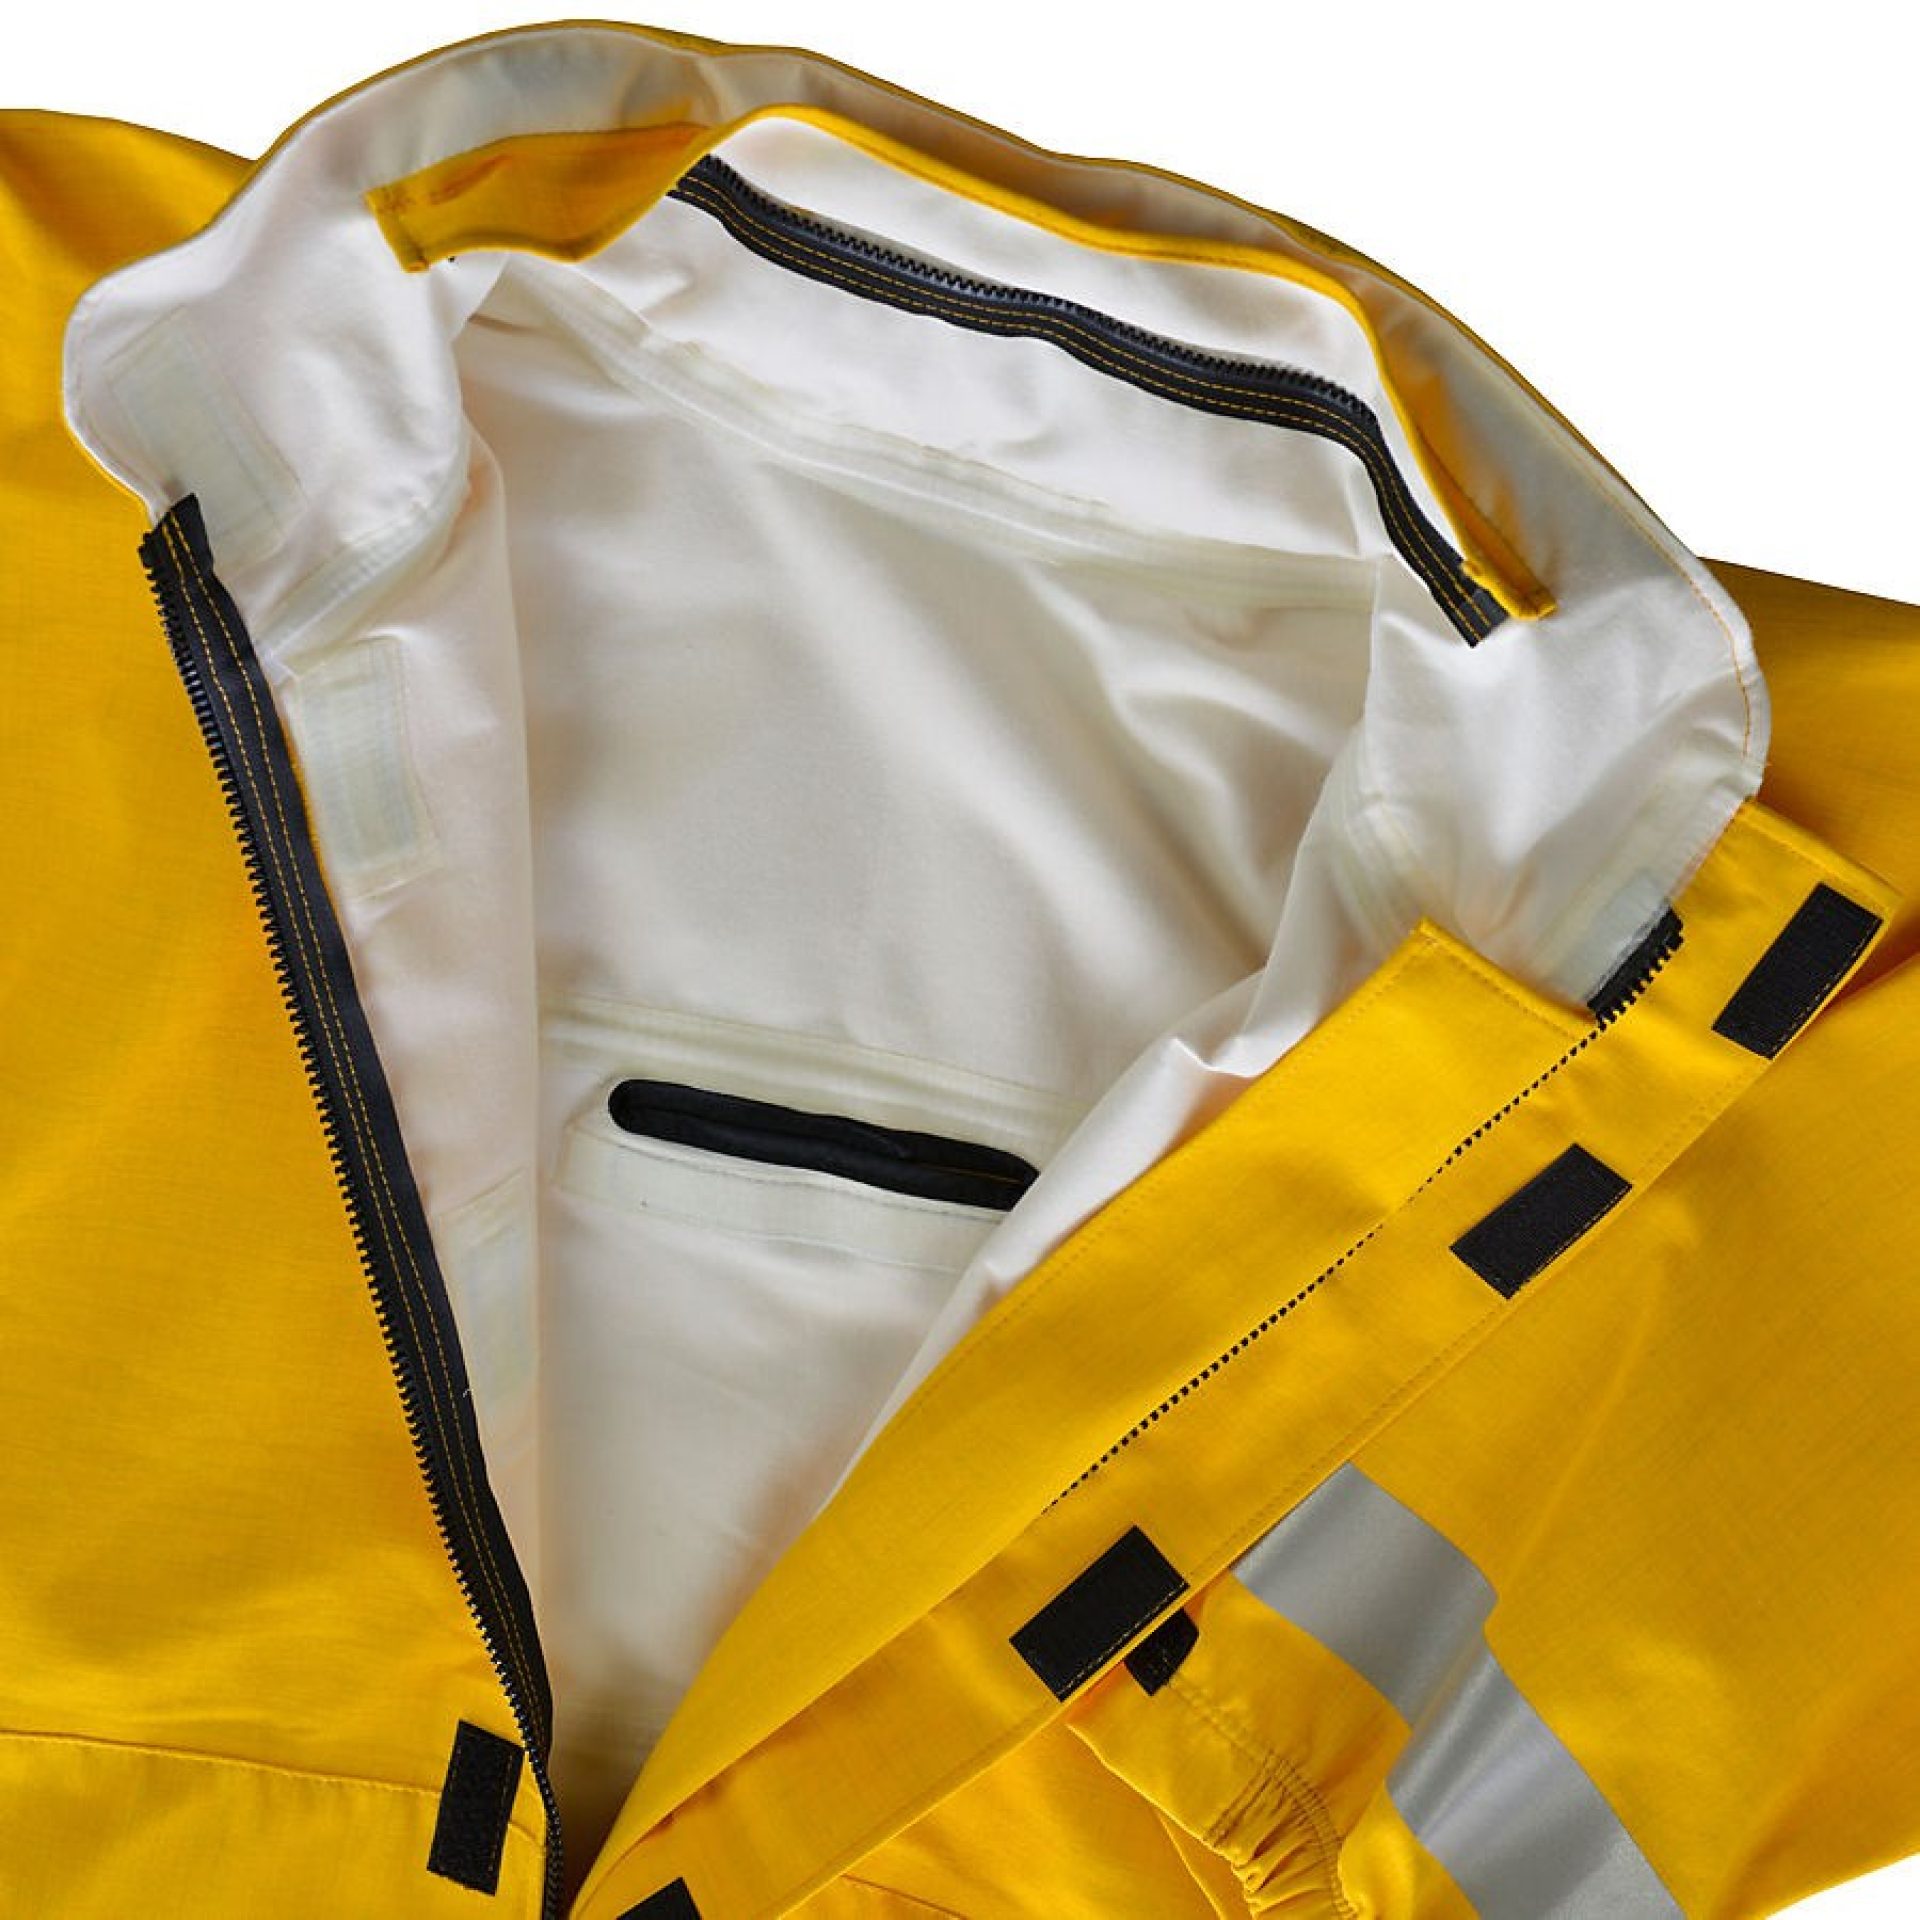 MP3 Yellow Jacket w Collar Zip-in for Liner/Fall Protection Access/Non-conductive Front Zipper